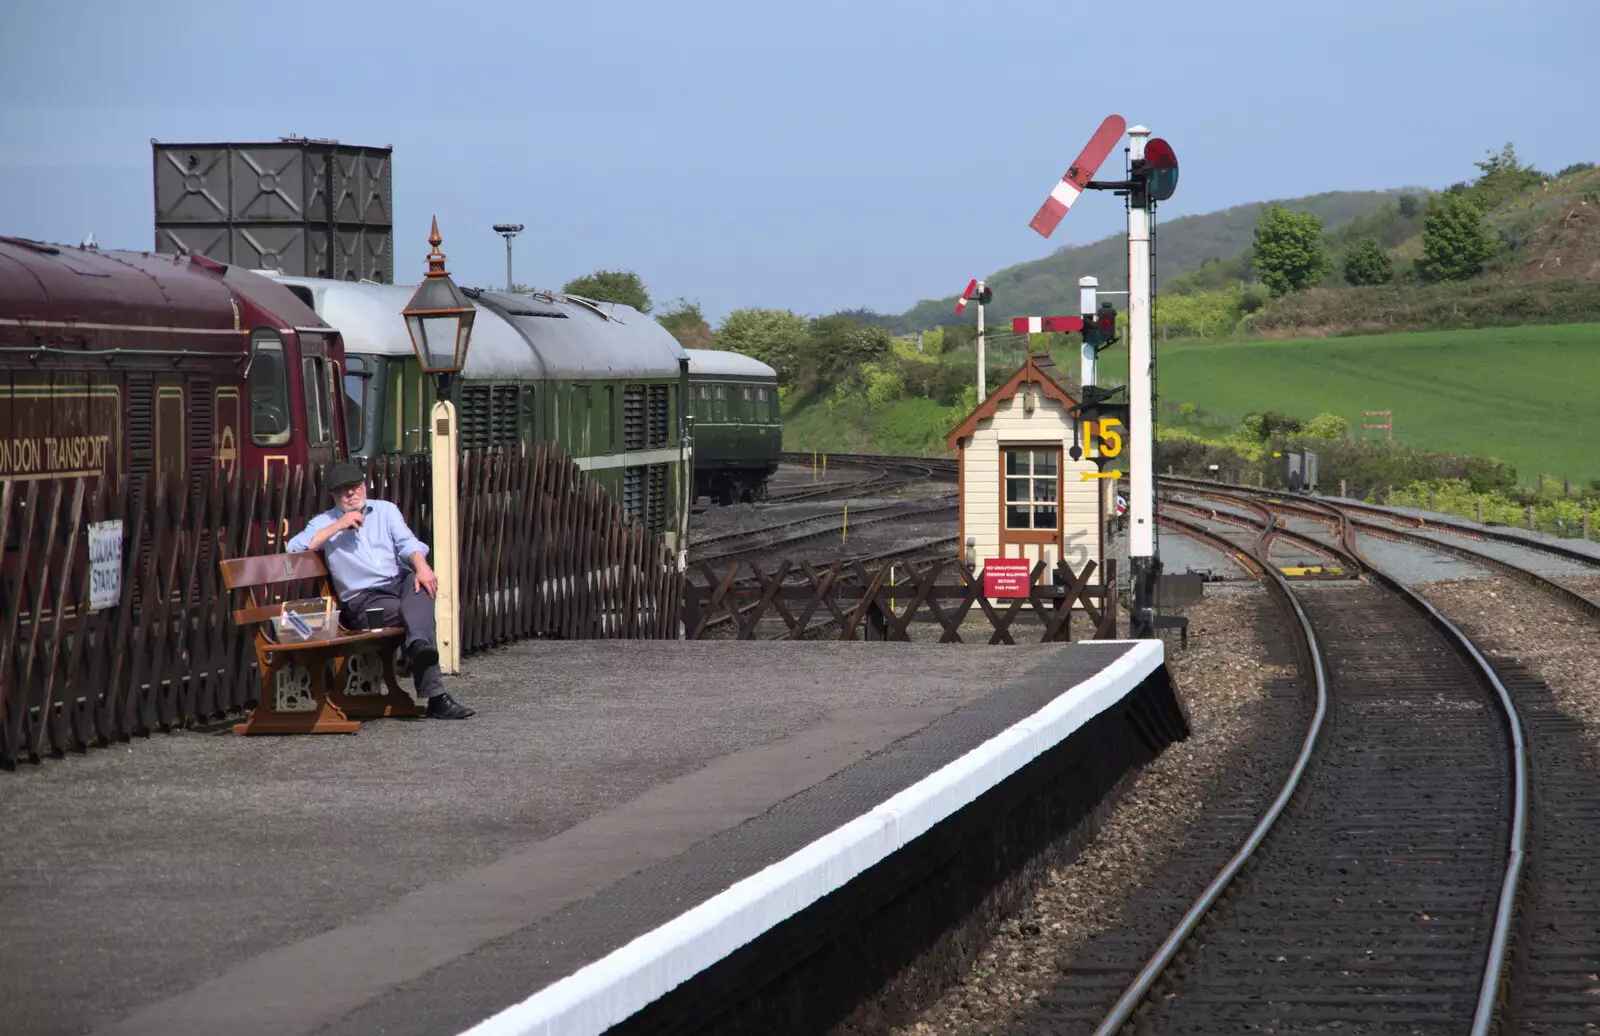 Some dude waits on the platform at Weybourne, from A Coronation Camping Picnic, Kelling Heath, Norfolk - 6th May 2023